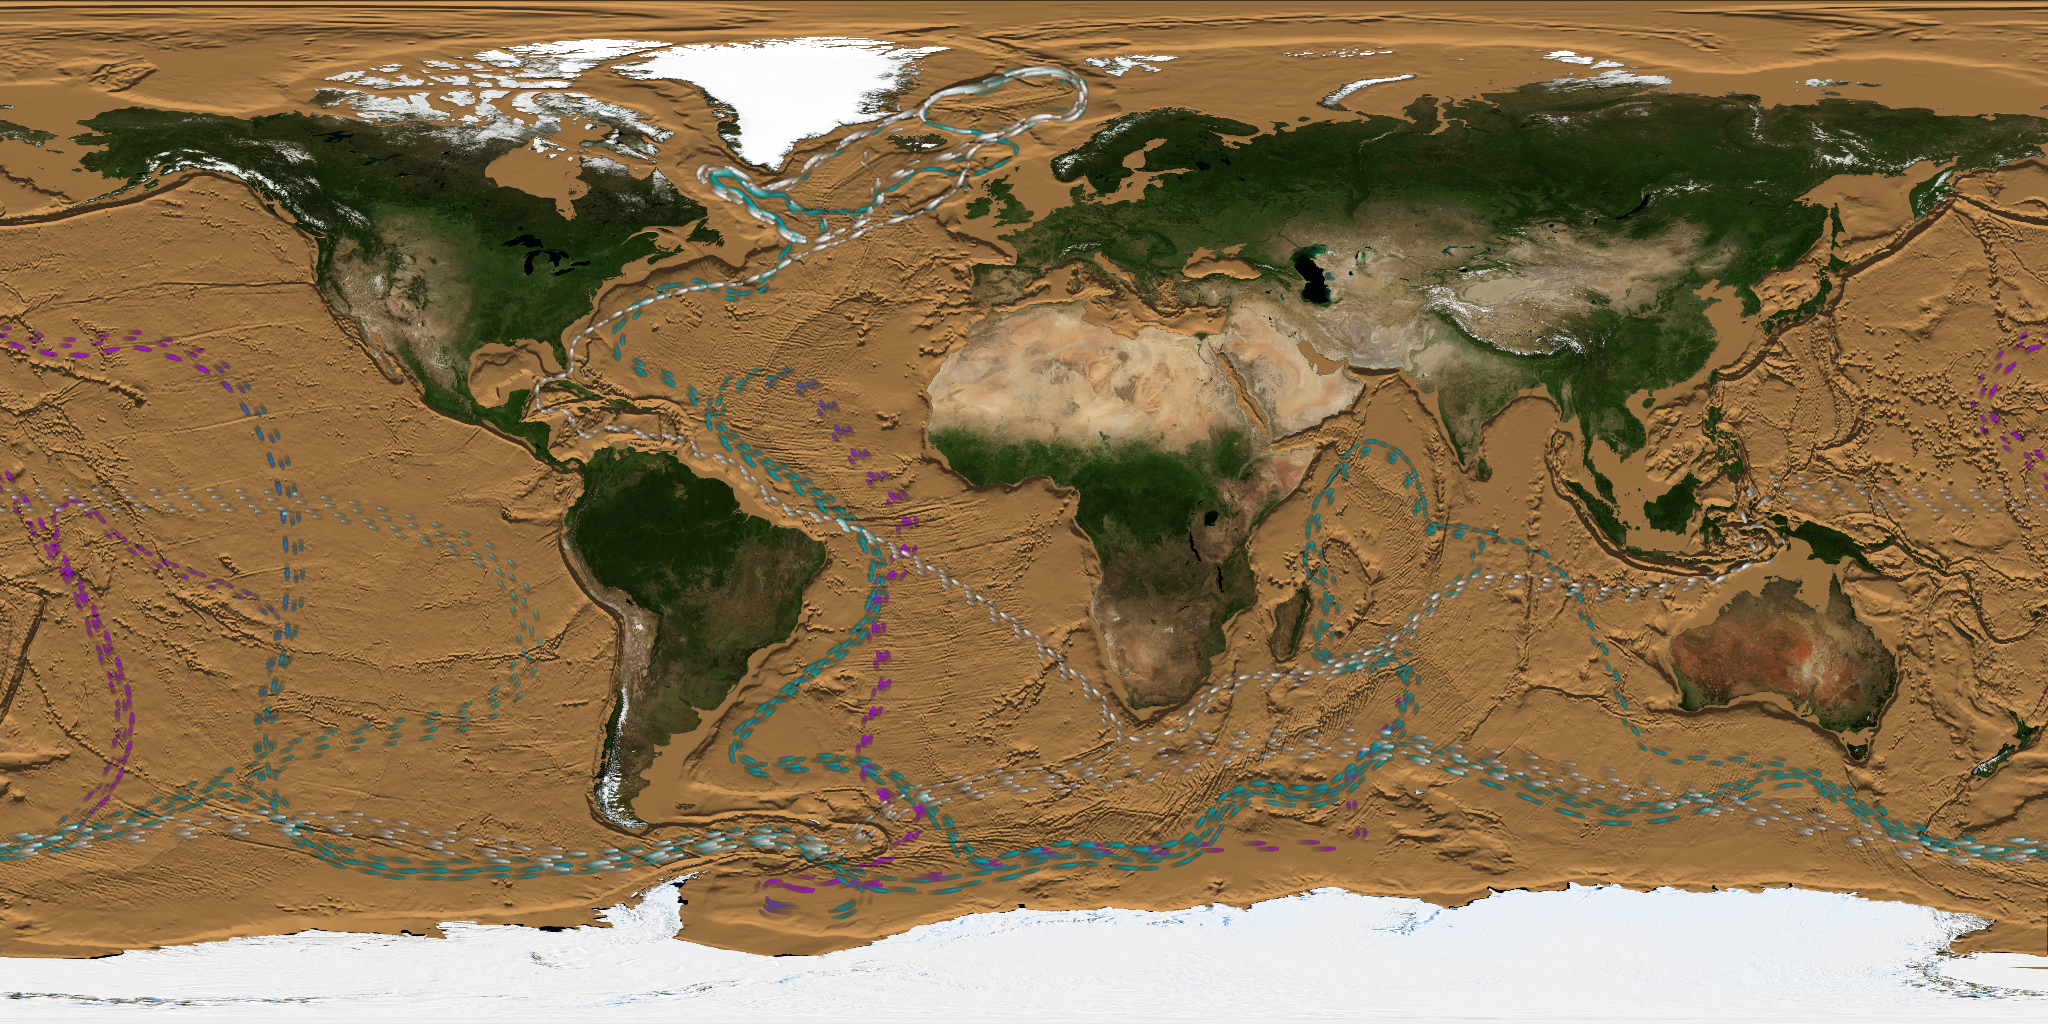 All 3 thermohaline layers (shallow, middle, and deep) composited over the Earth background.  This version can be looped.